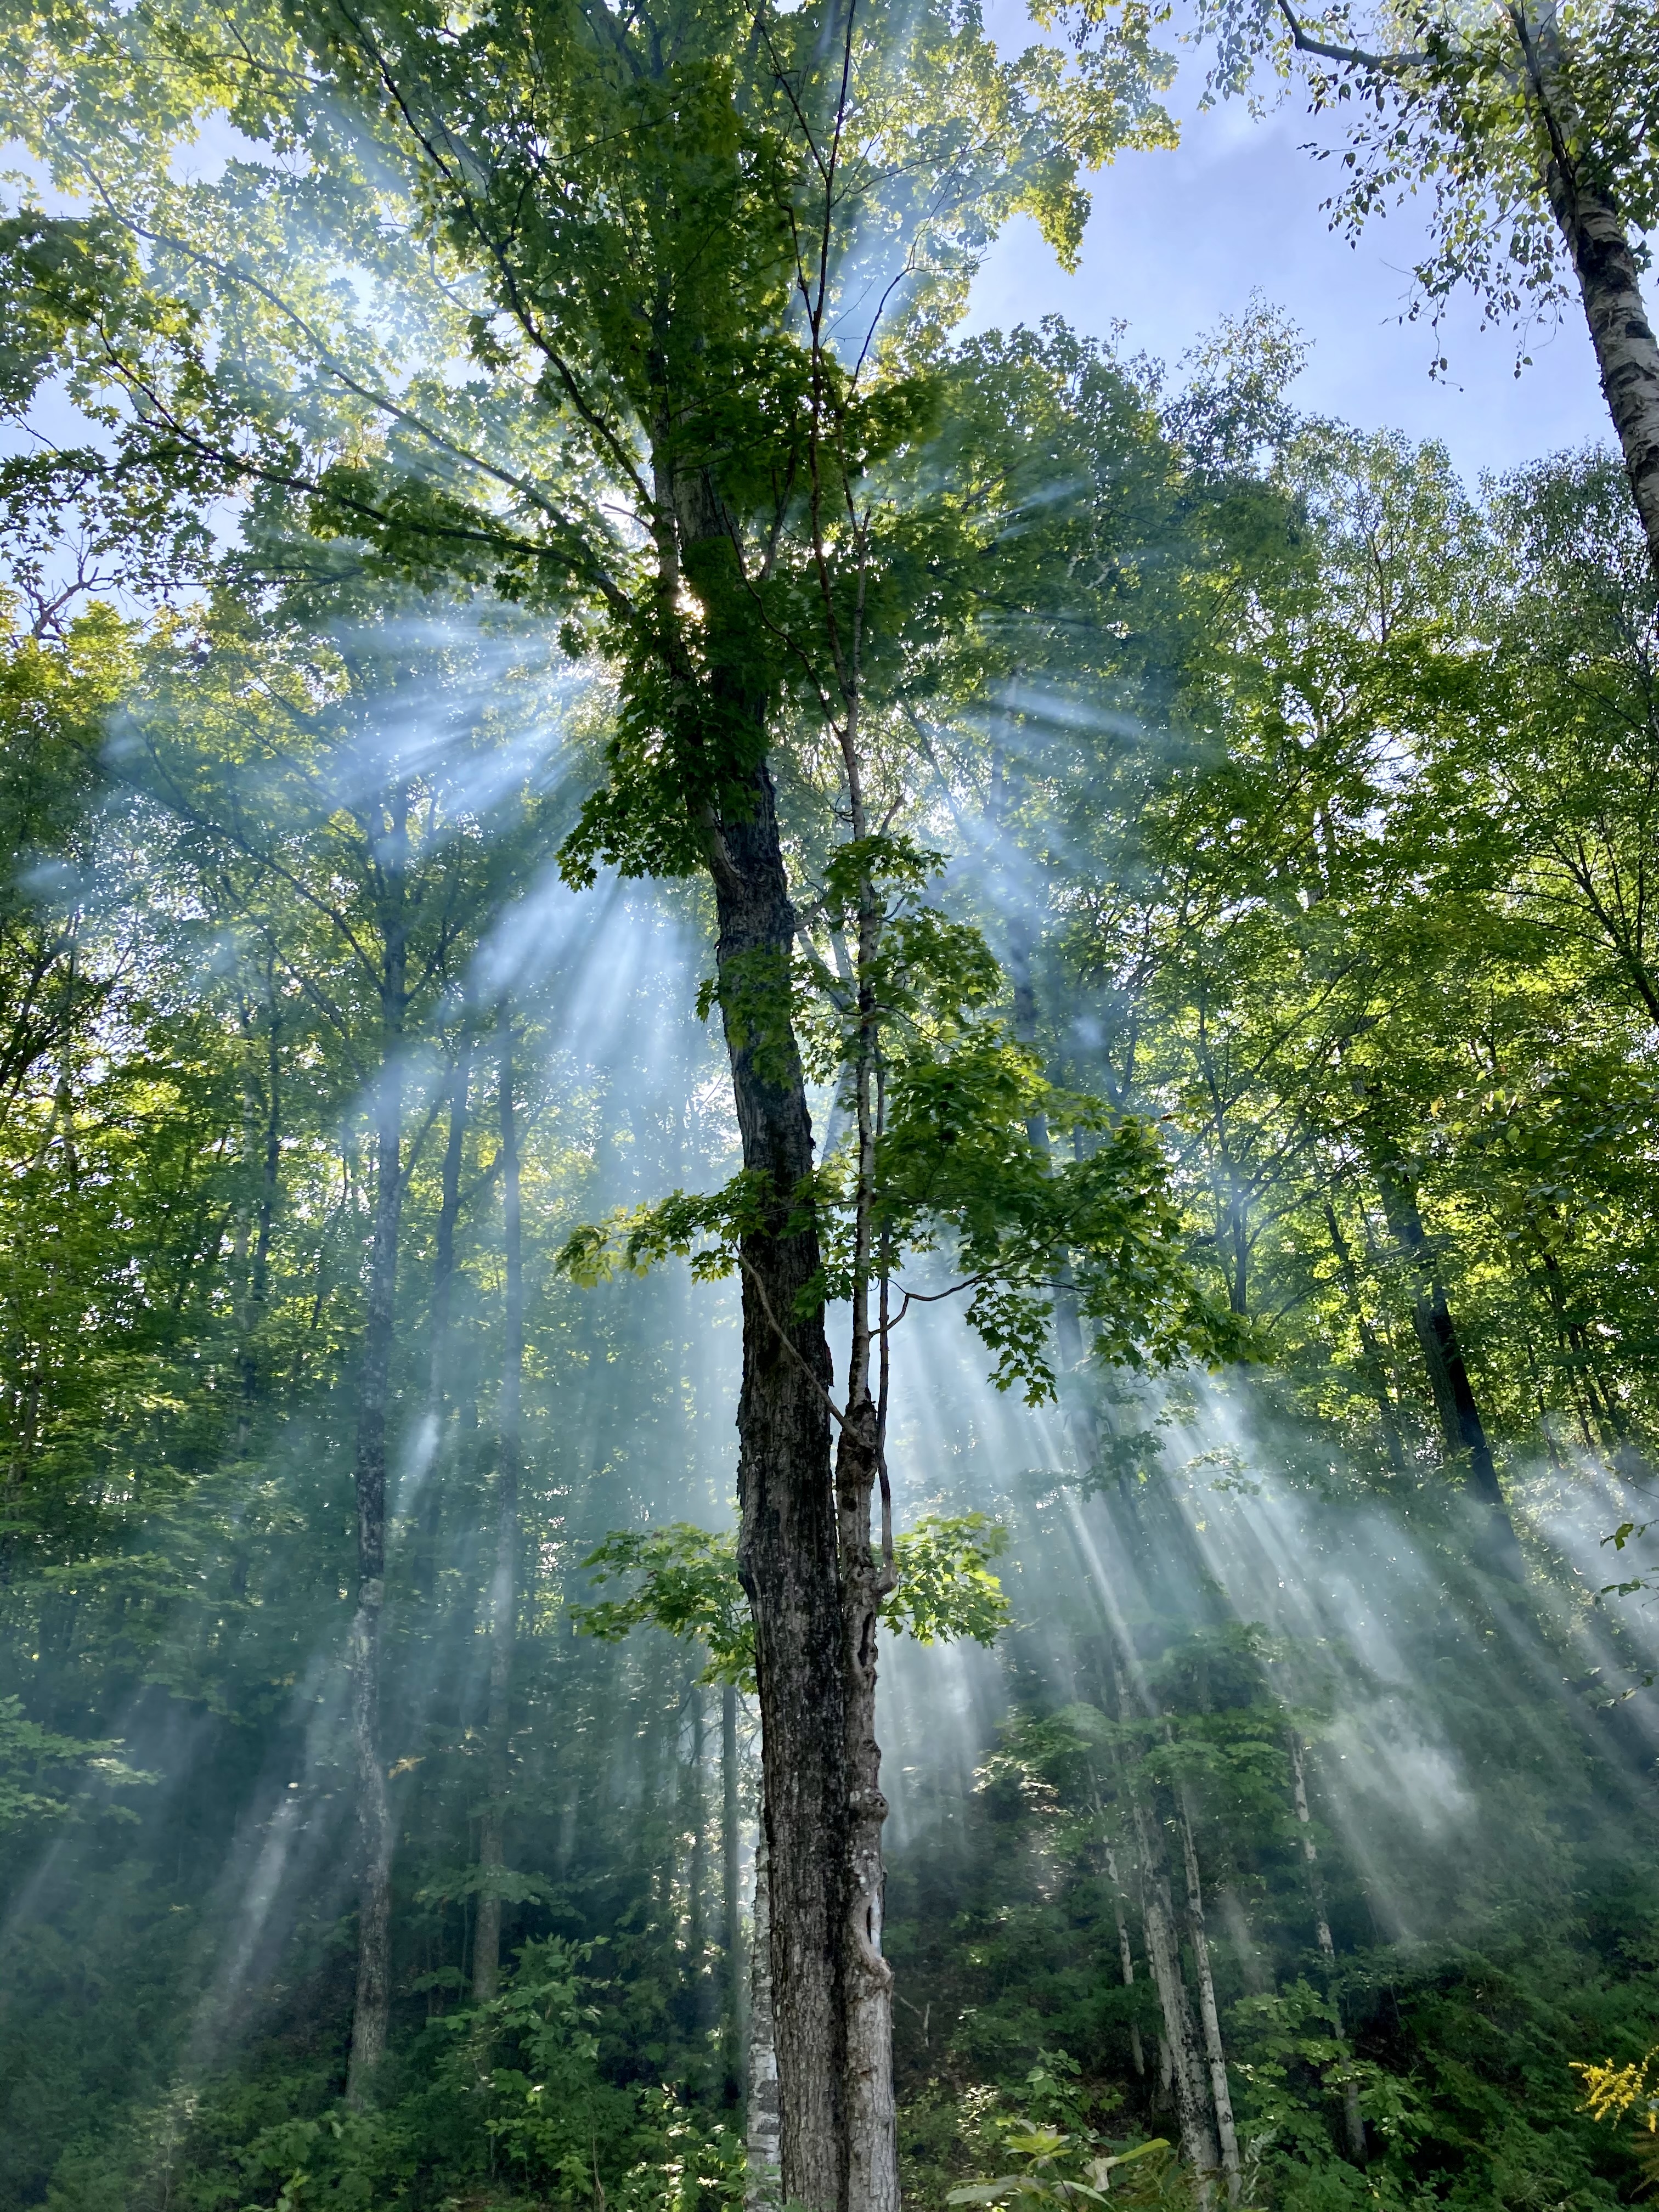 White smoke from the fire blown up into the surrounding trees on a sunny day, leading to rays of light through the smoke.